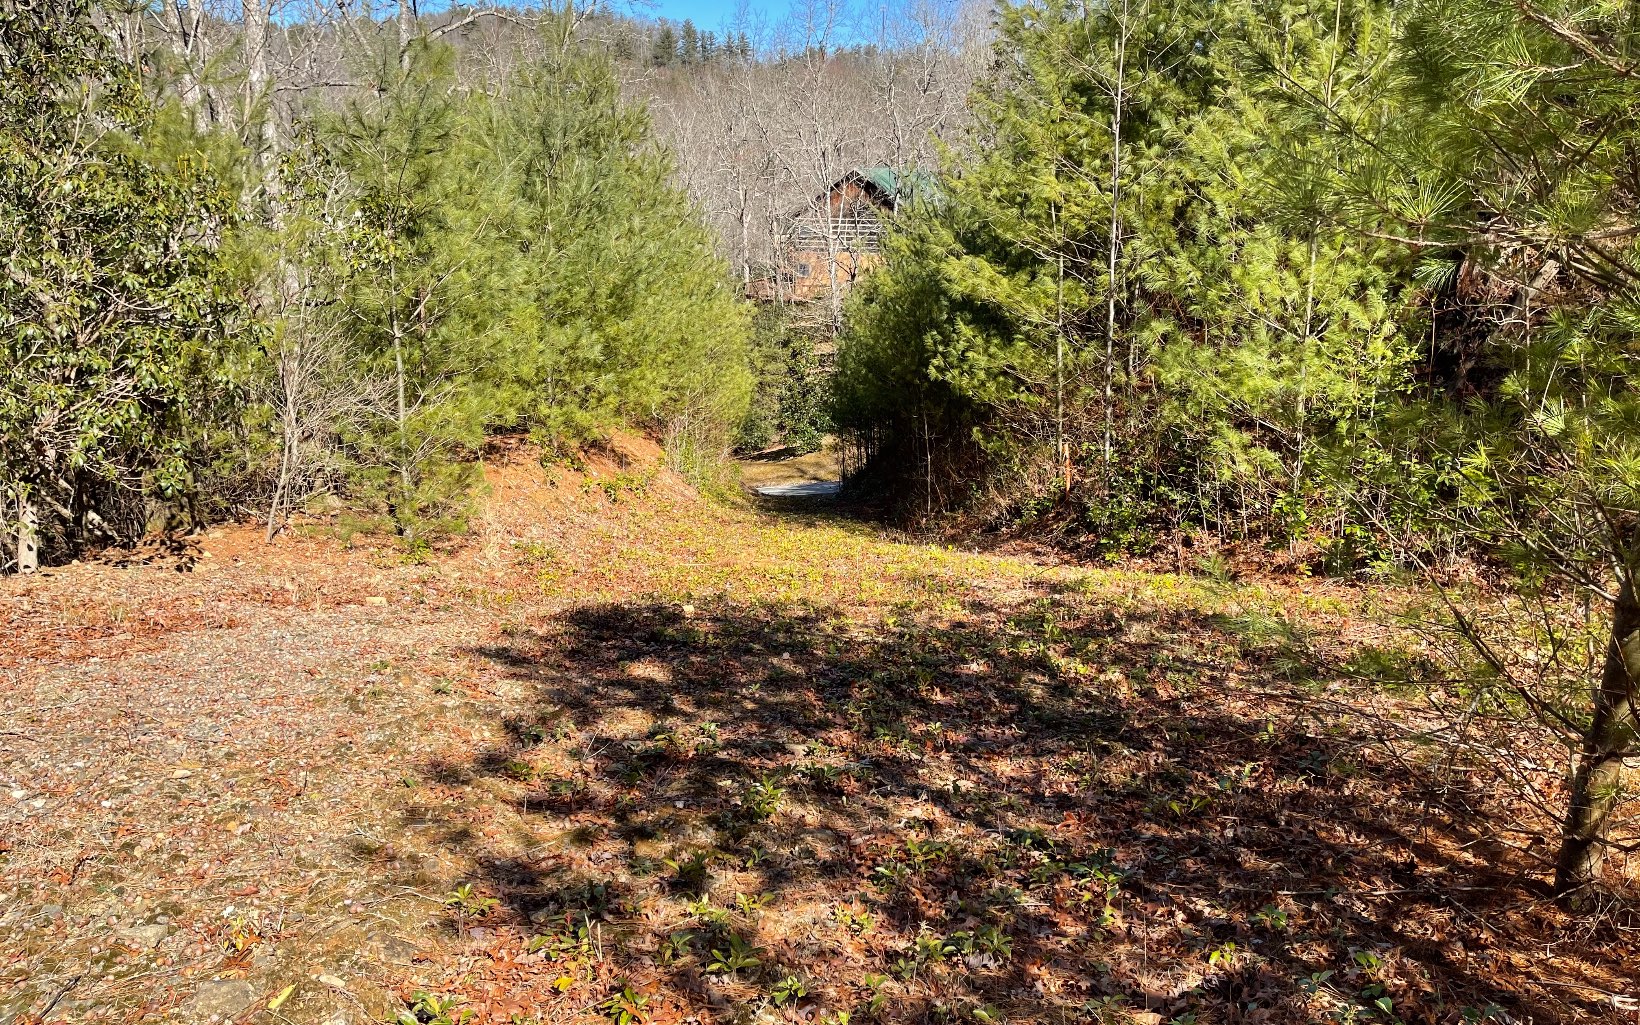 COME BUILD YOUR PRIVATE NORTH GEORGIA MOUNTAIN GETAWAY IN A GATED SUBDIVISION BETWEEN HIAWASSEE & HELEN GA!! Wooded Lot in the Mountains of North Georgia. The community offers gated entrance, ponds, Creekside fun and fishing, privacy. Short walk to Appalachian trails, in addition a short ride to Brasstown Bald.